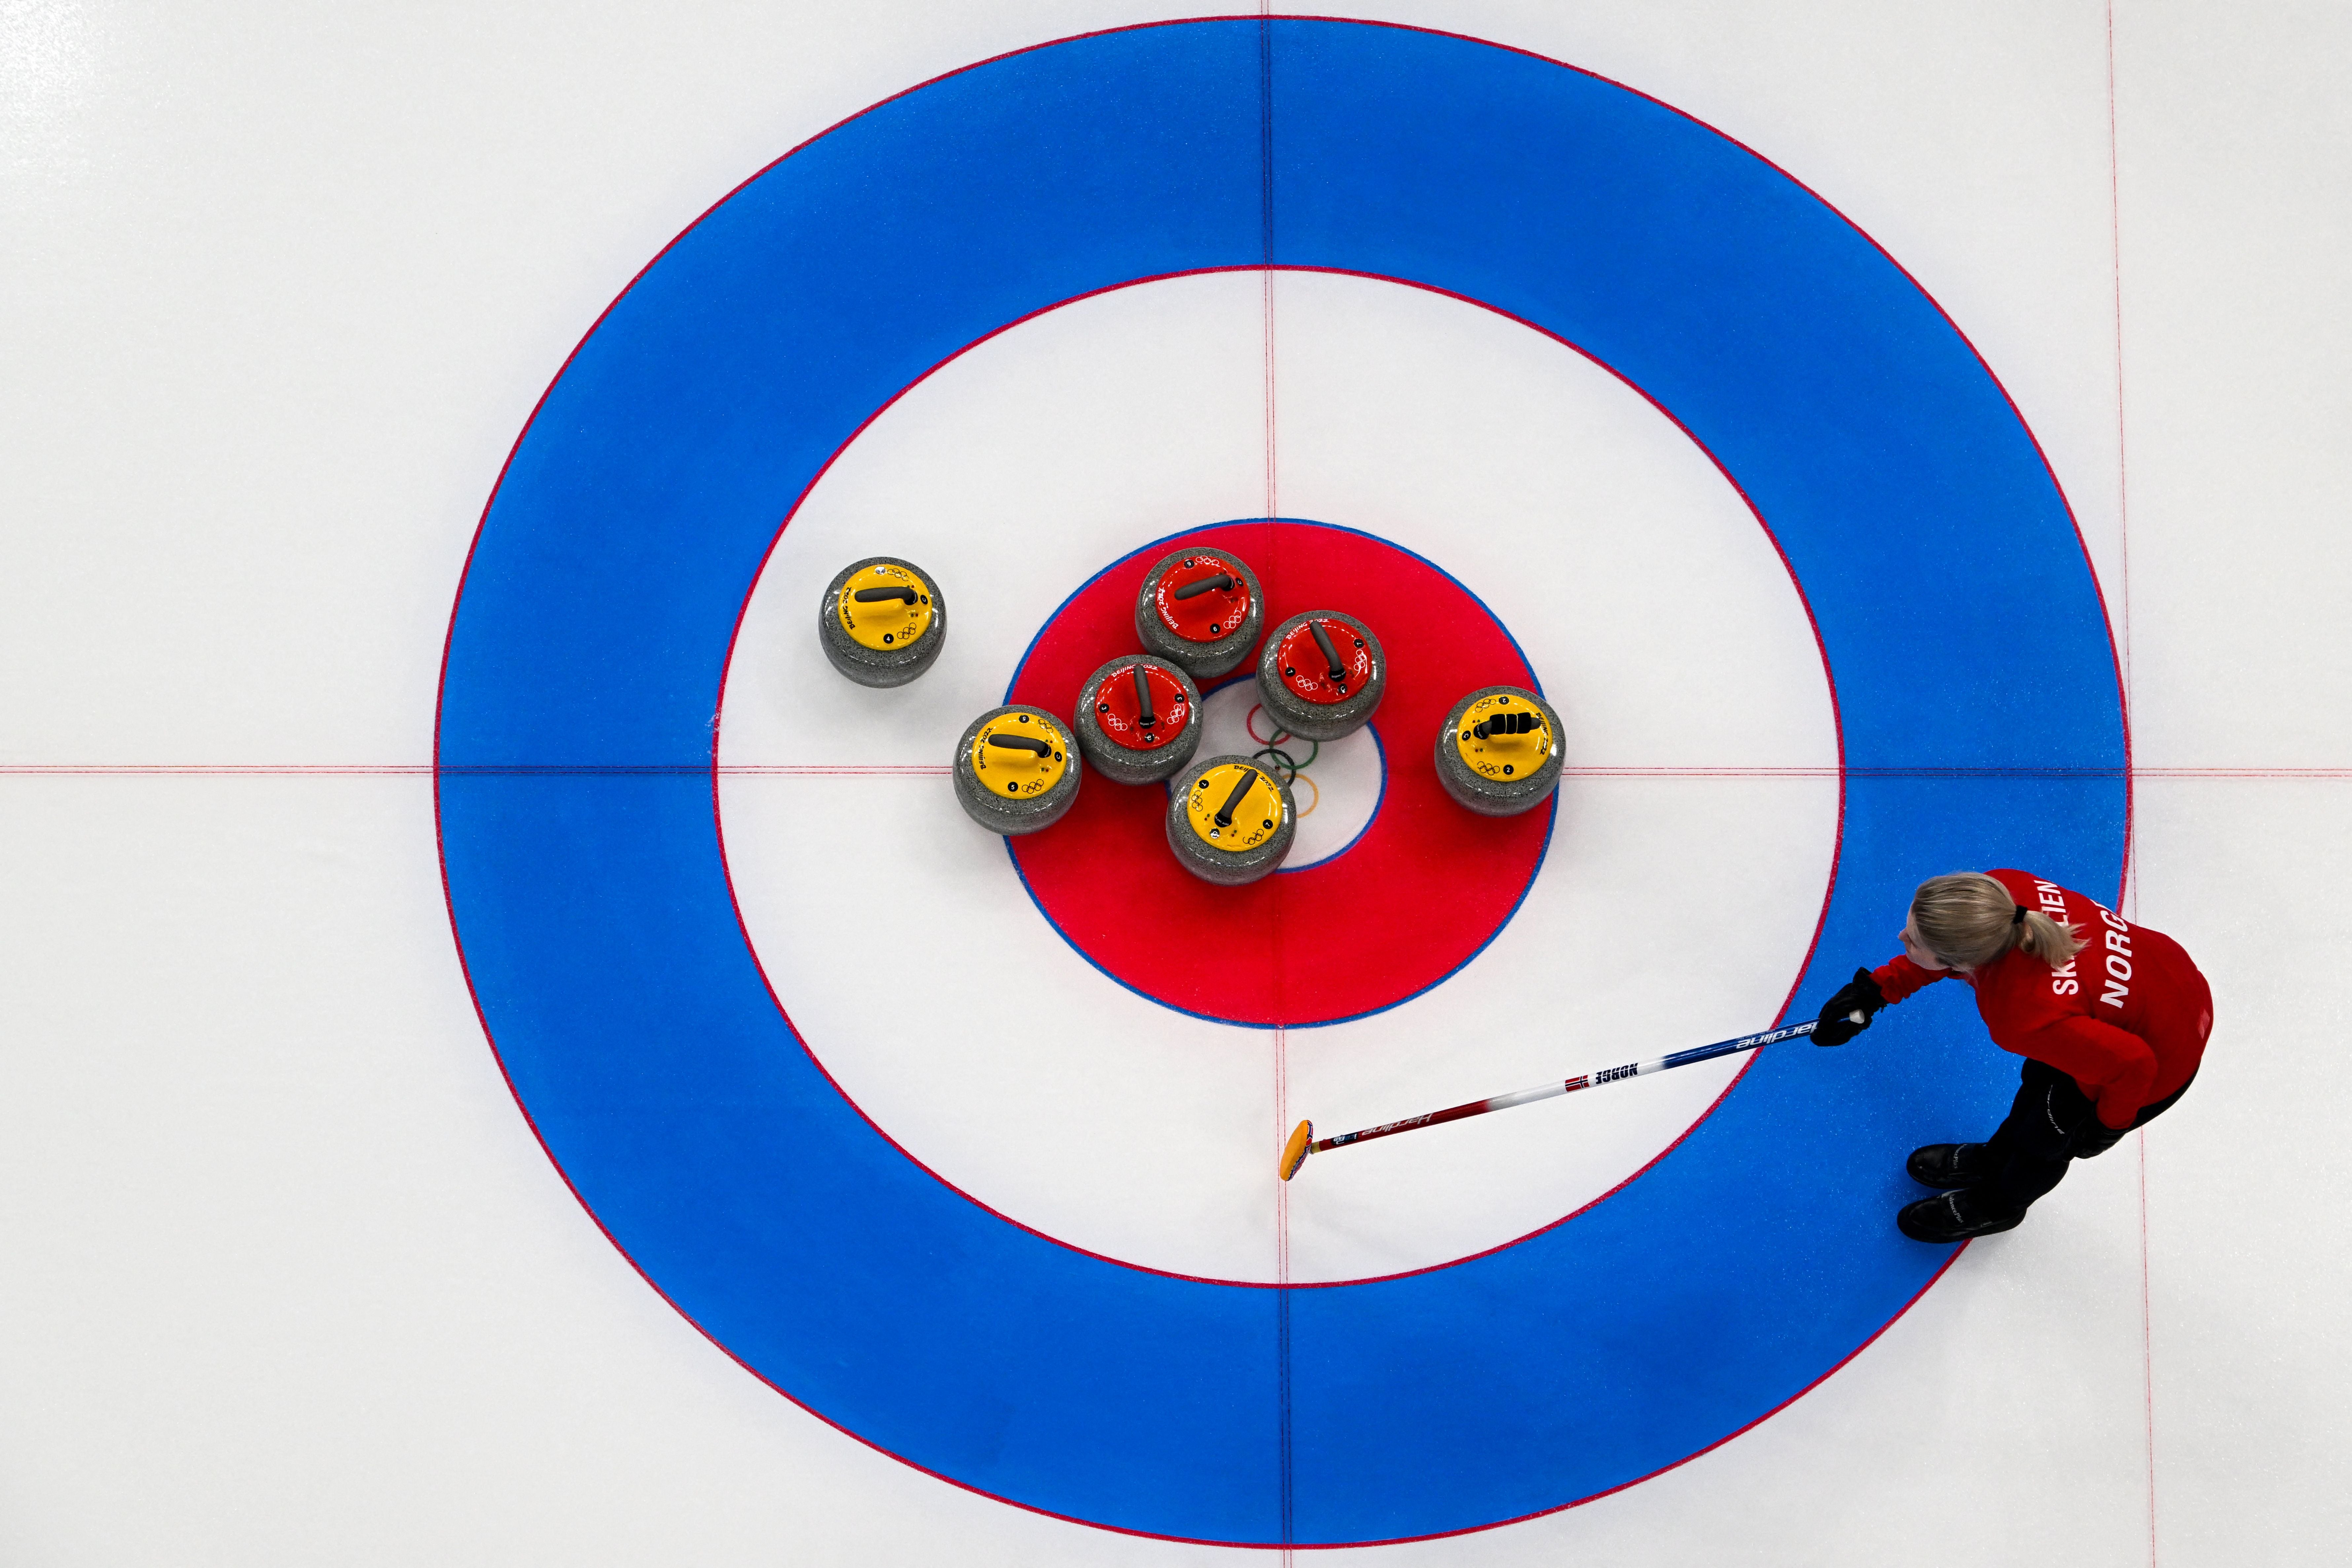 What does having the hammer mean in curling and how do you get it? The Independent